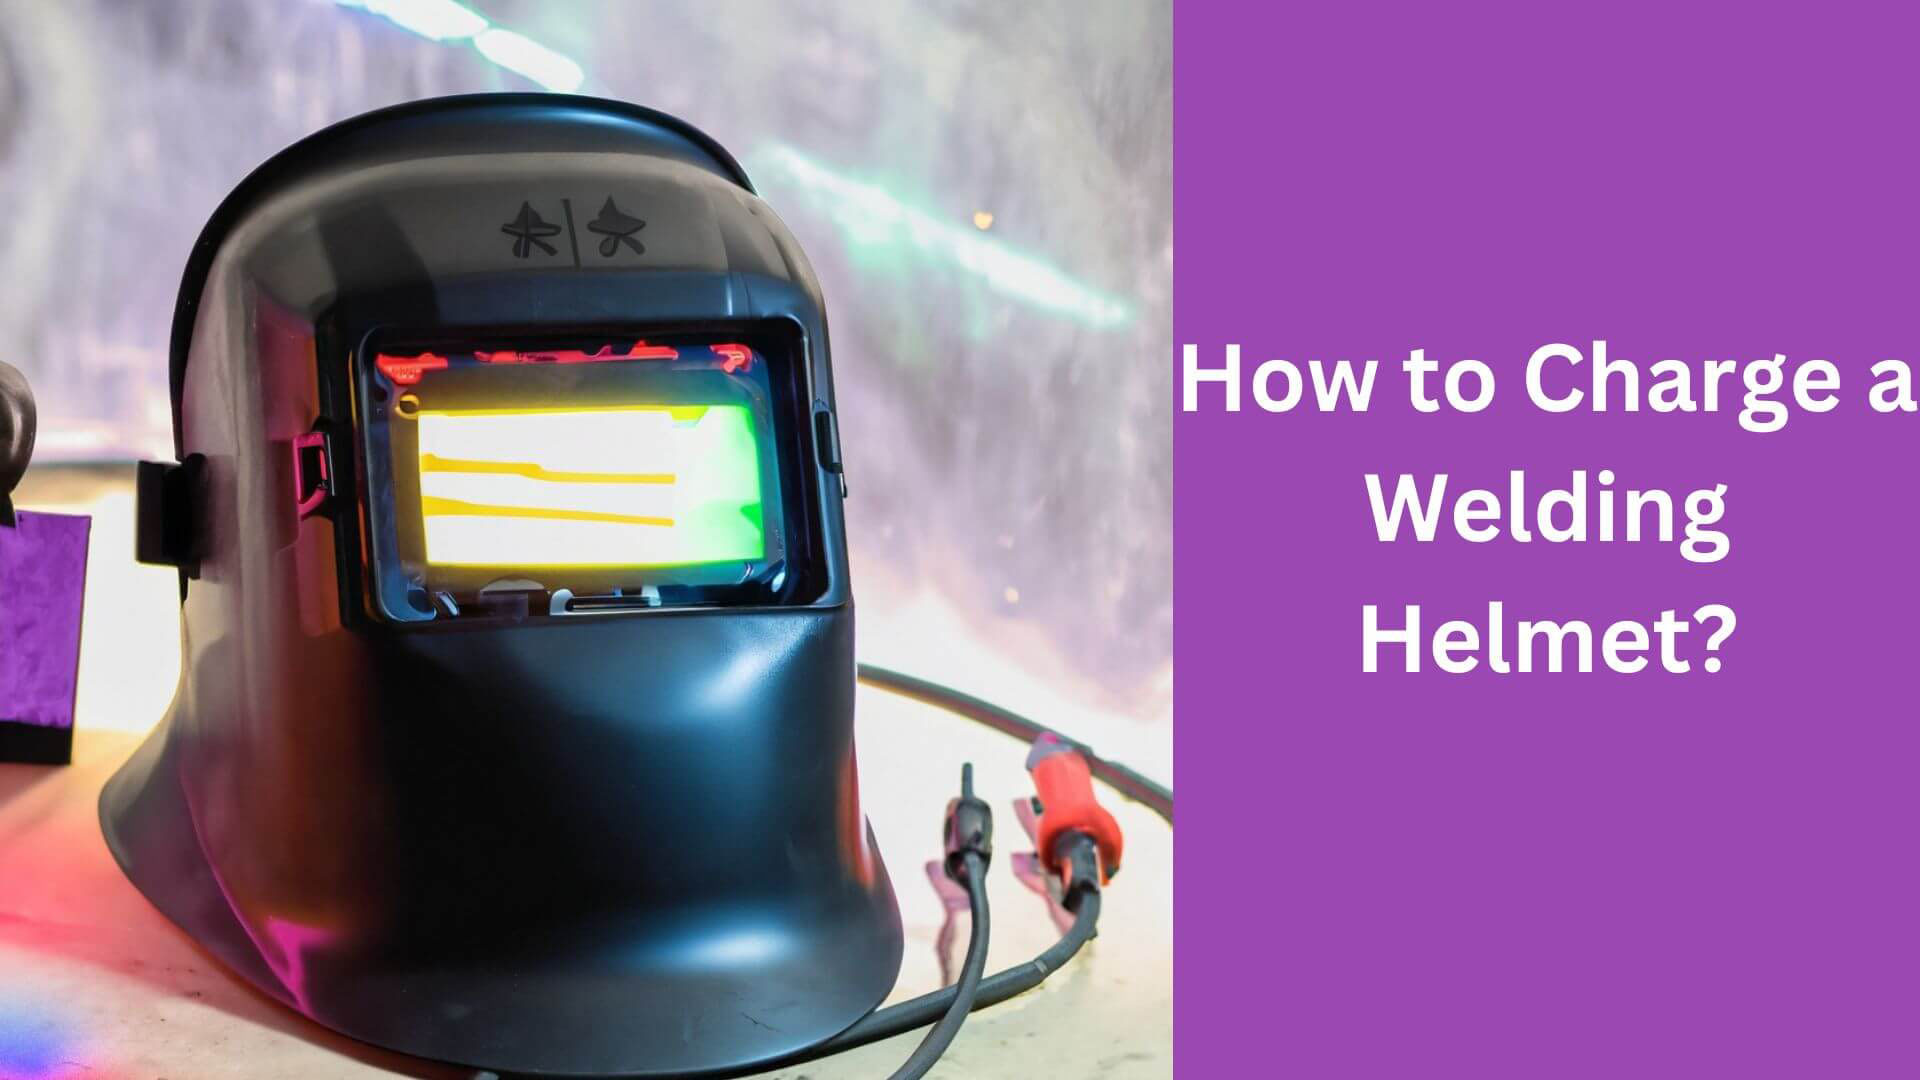 How to Charge a Welding Helmet? A Comprehensive Charging Guide